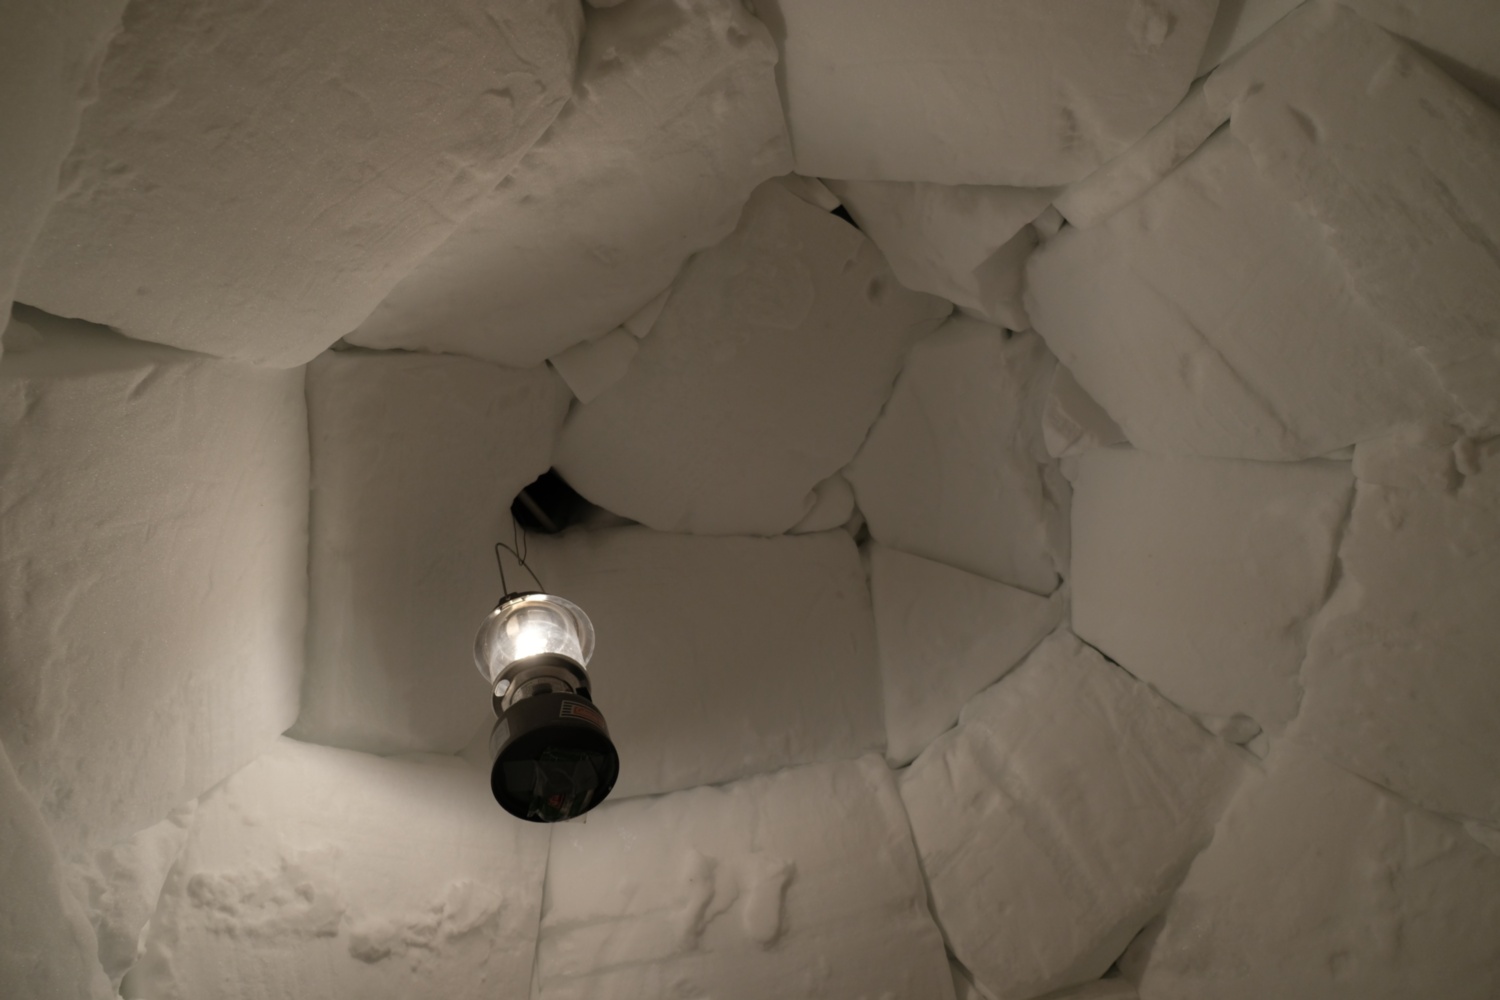 A lantern hung from the ceiling of the igloo.